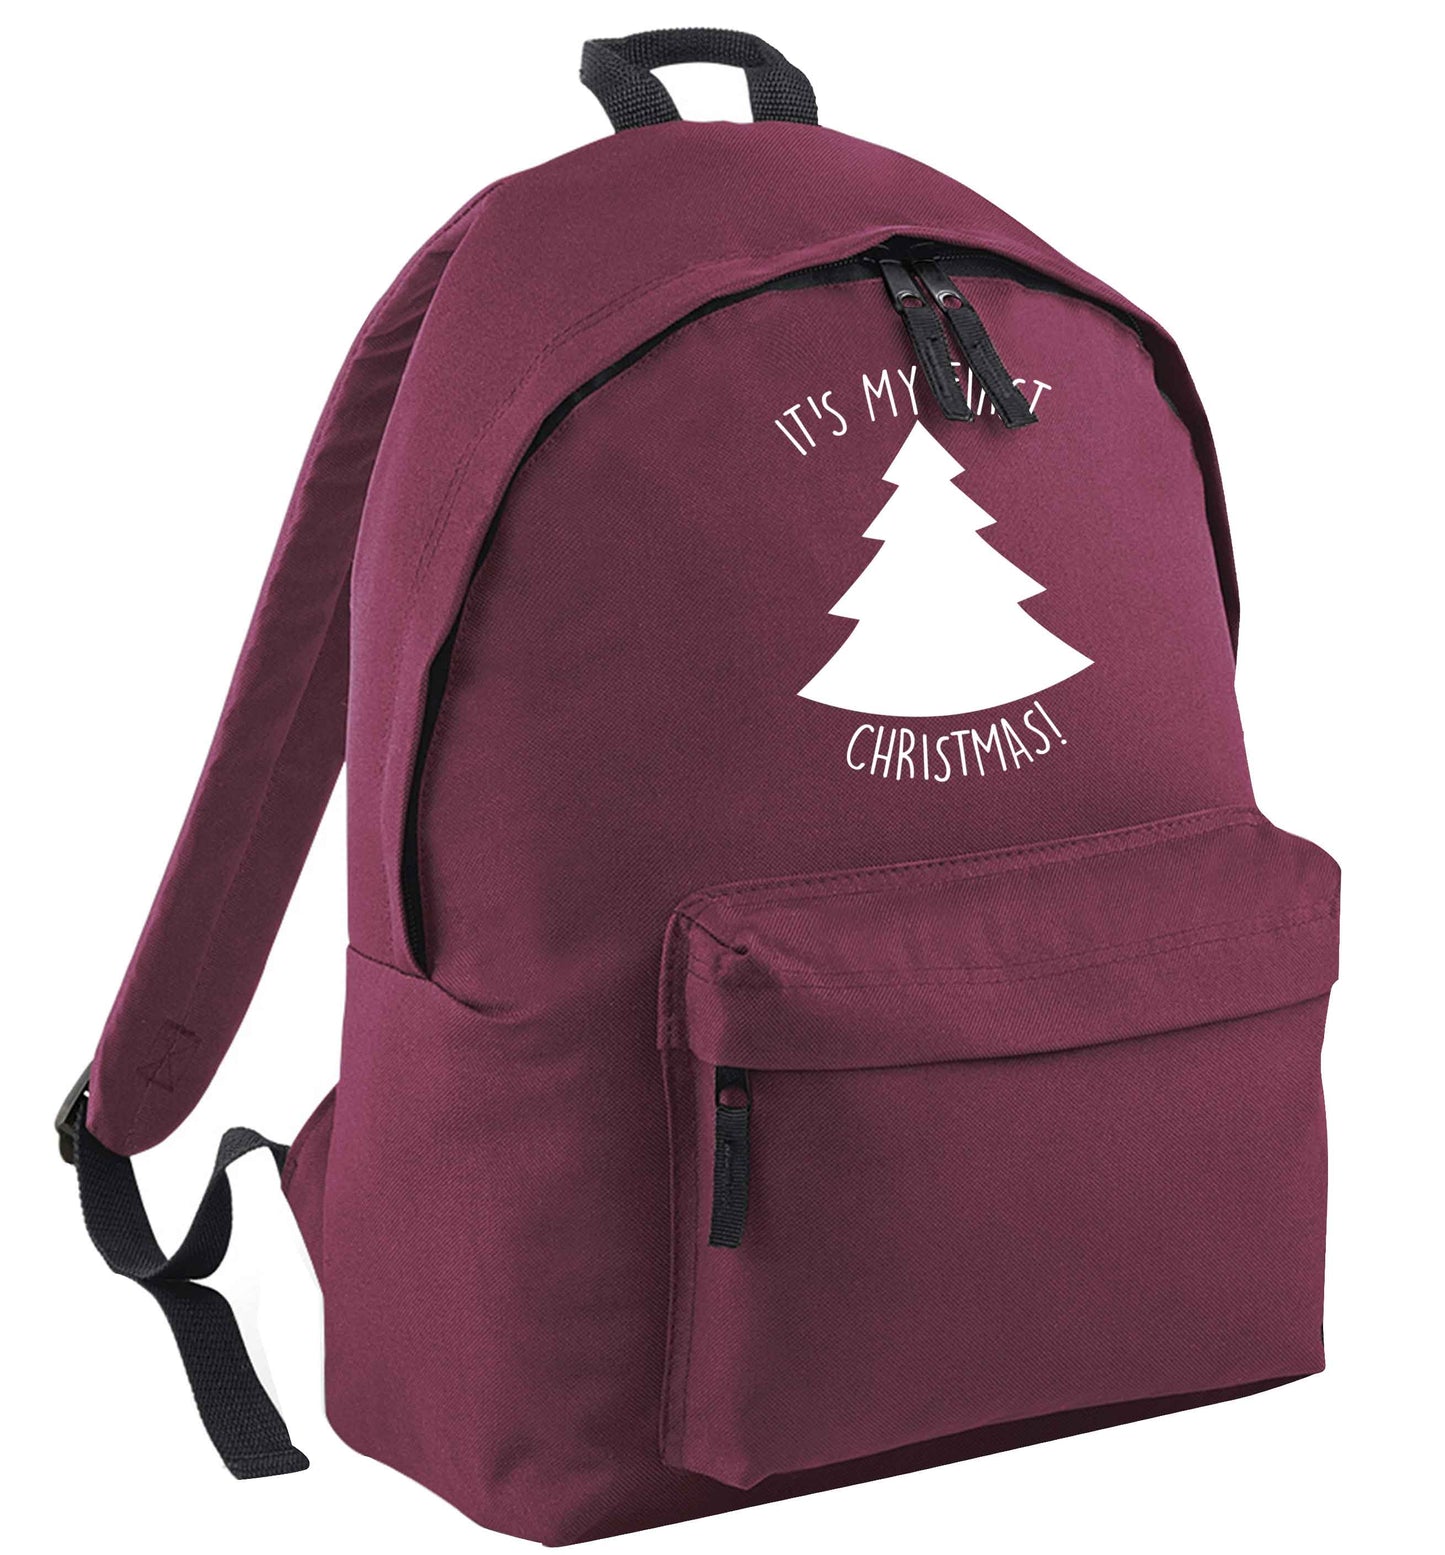 It's my first Christmas - tree maroon adults backpack